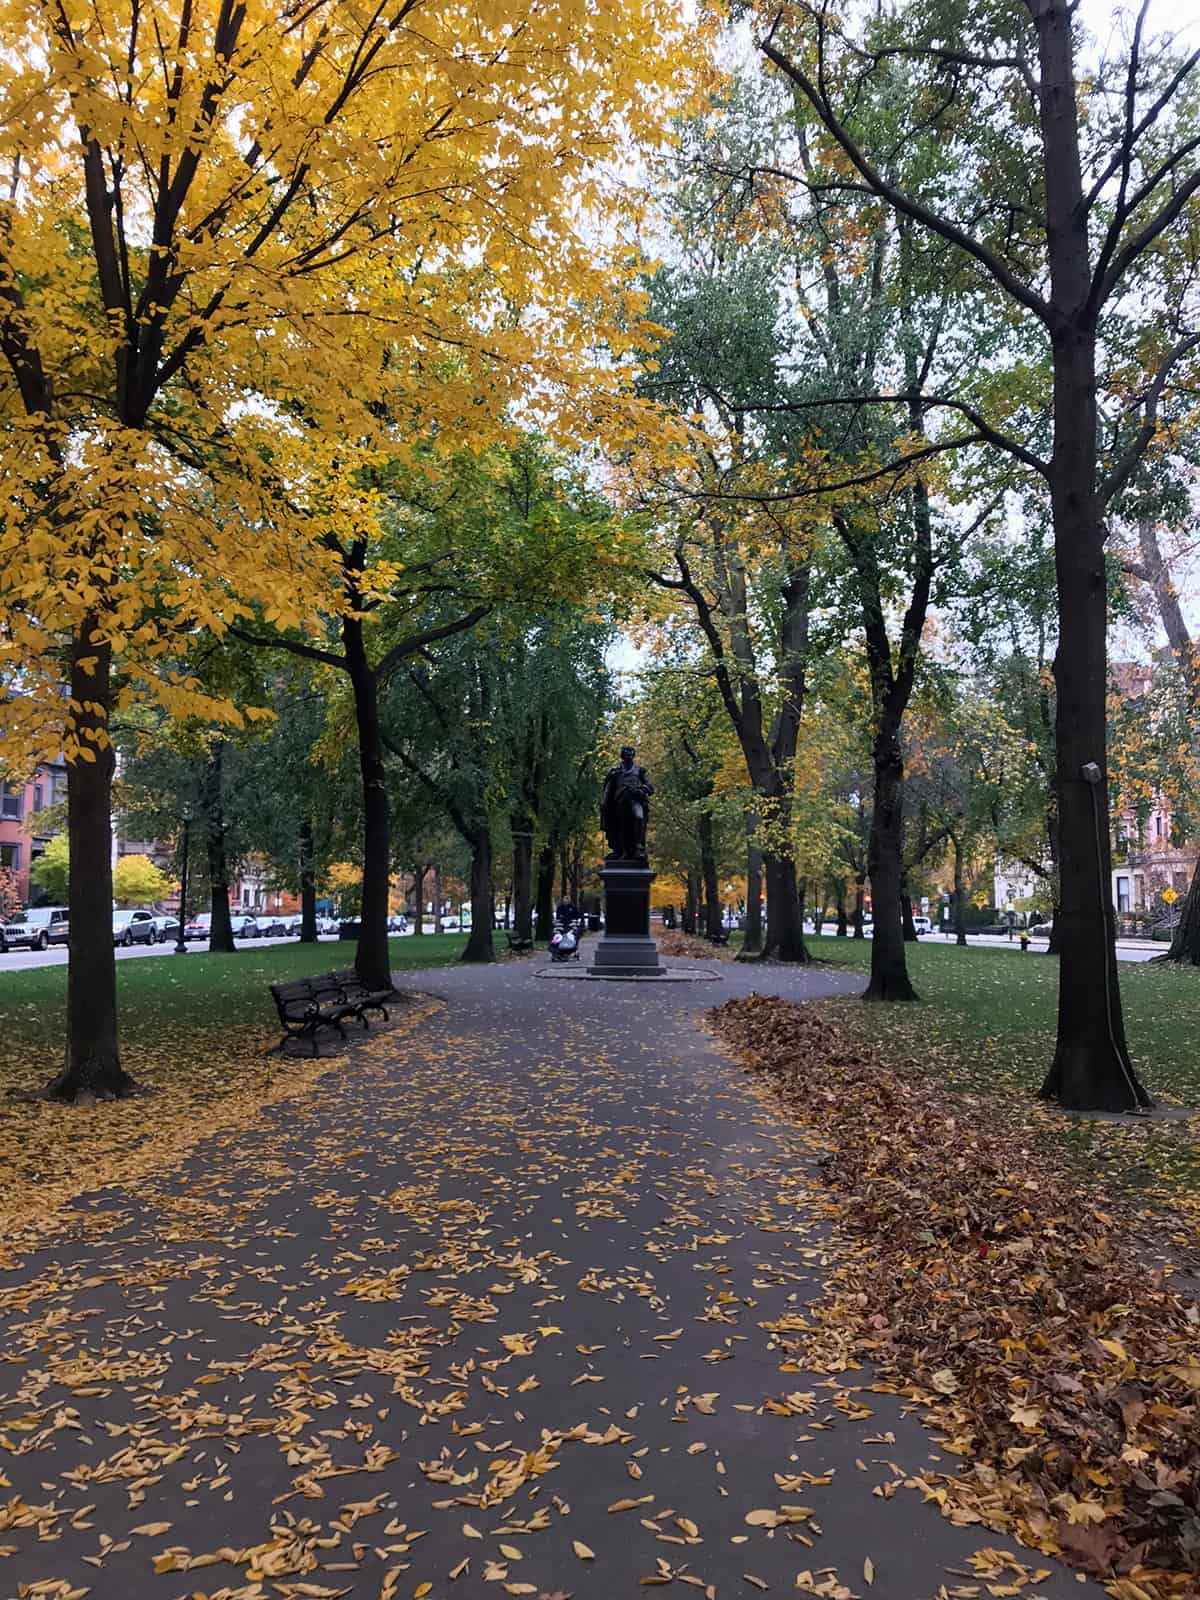 Yellow leaves changing colors on Commonwealth Avenue in Boston during the fall